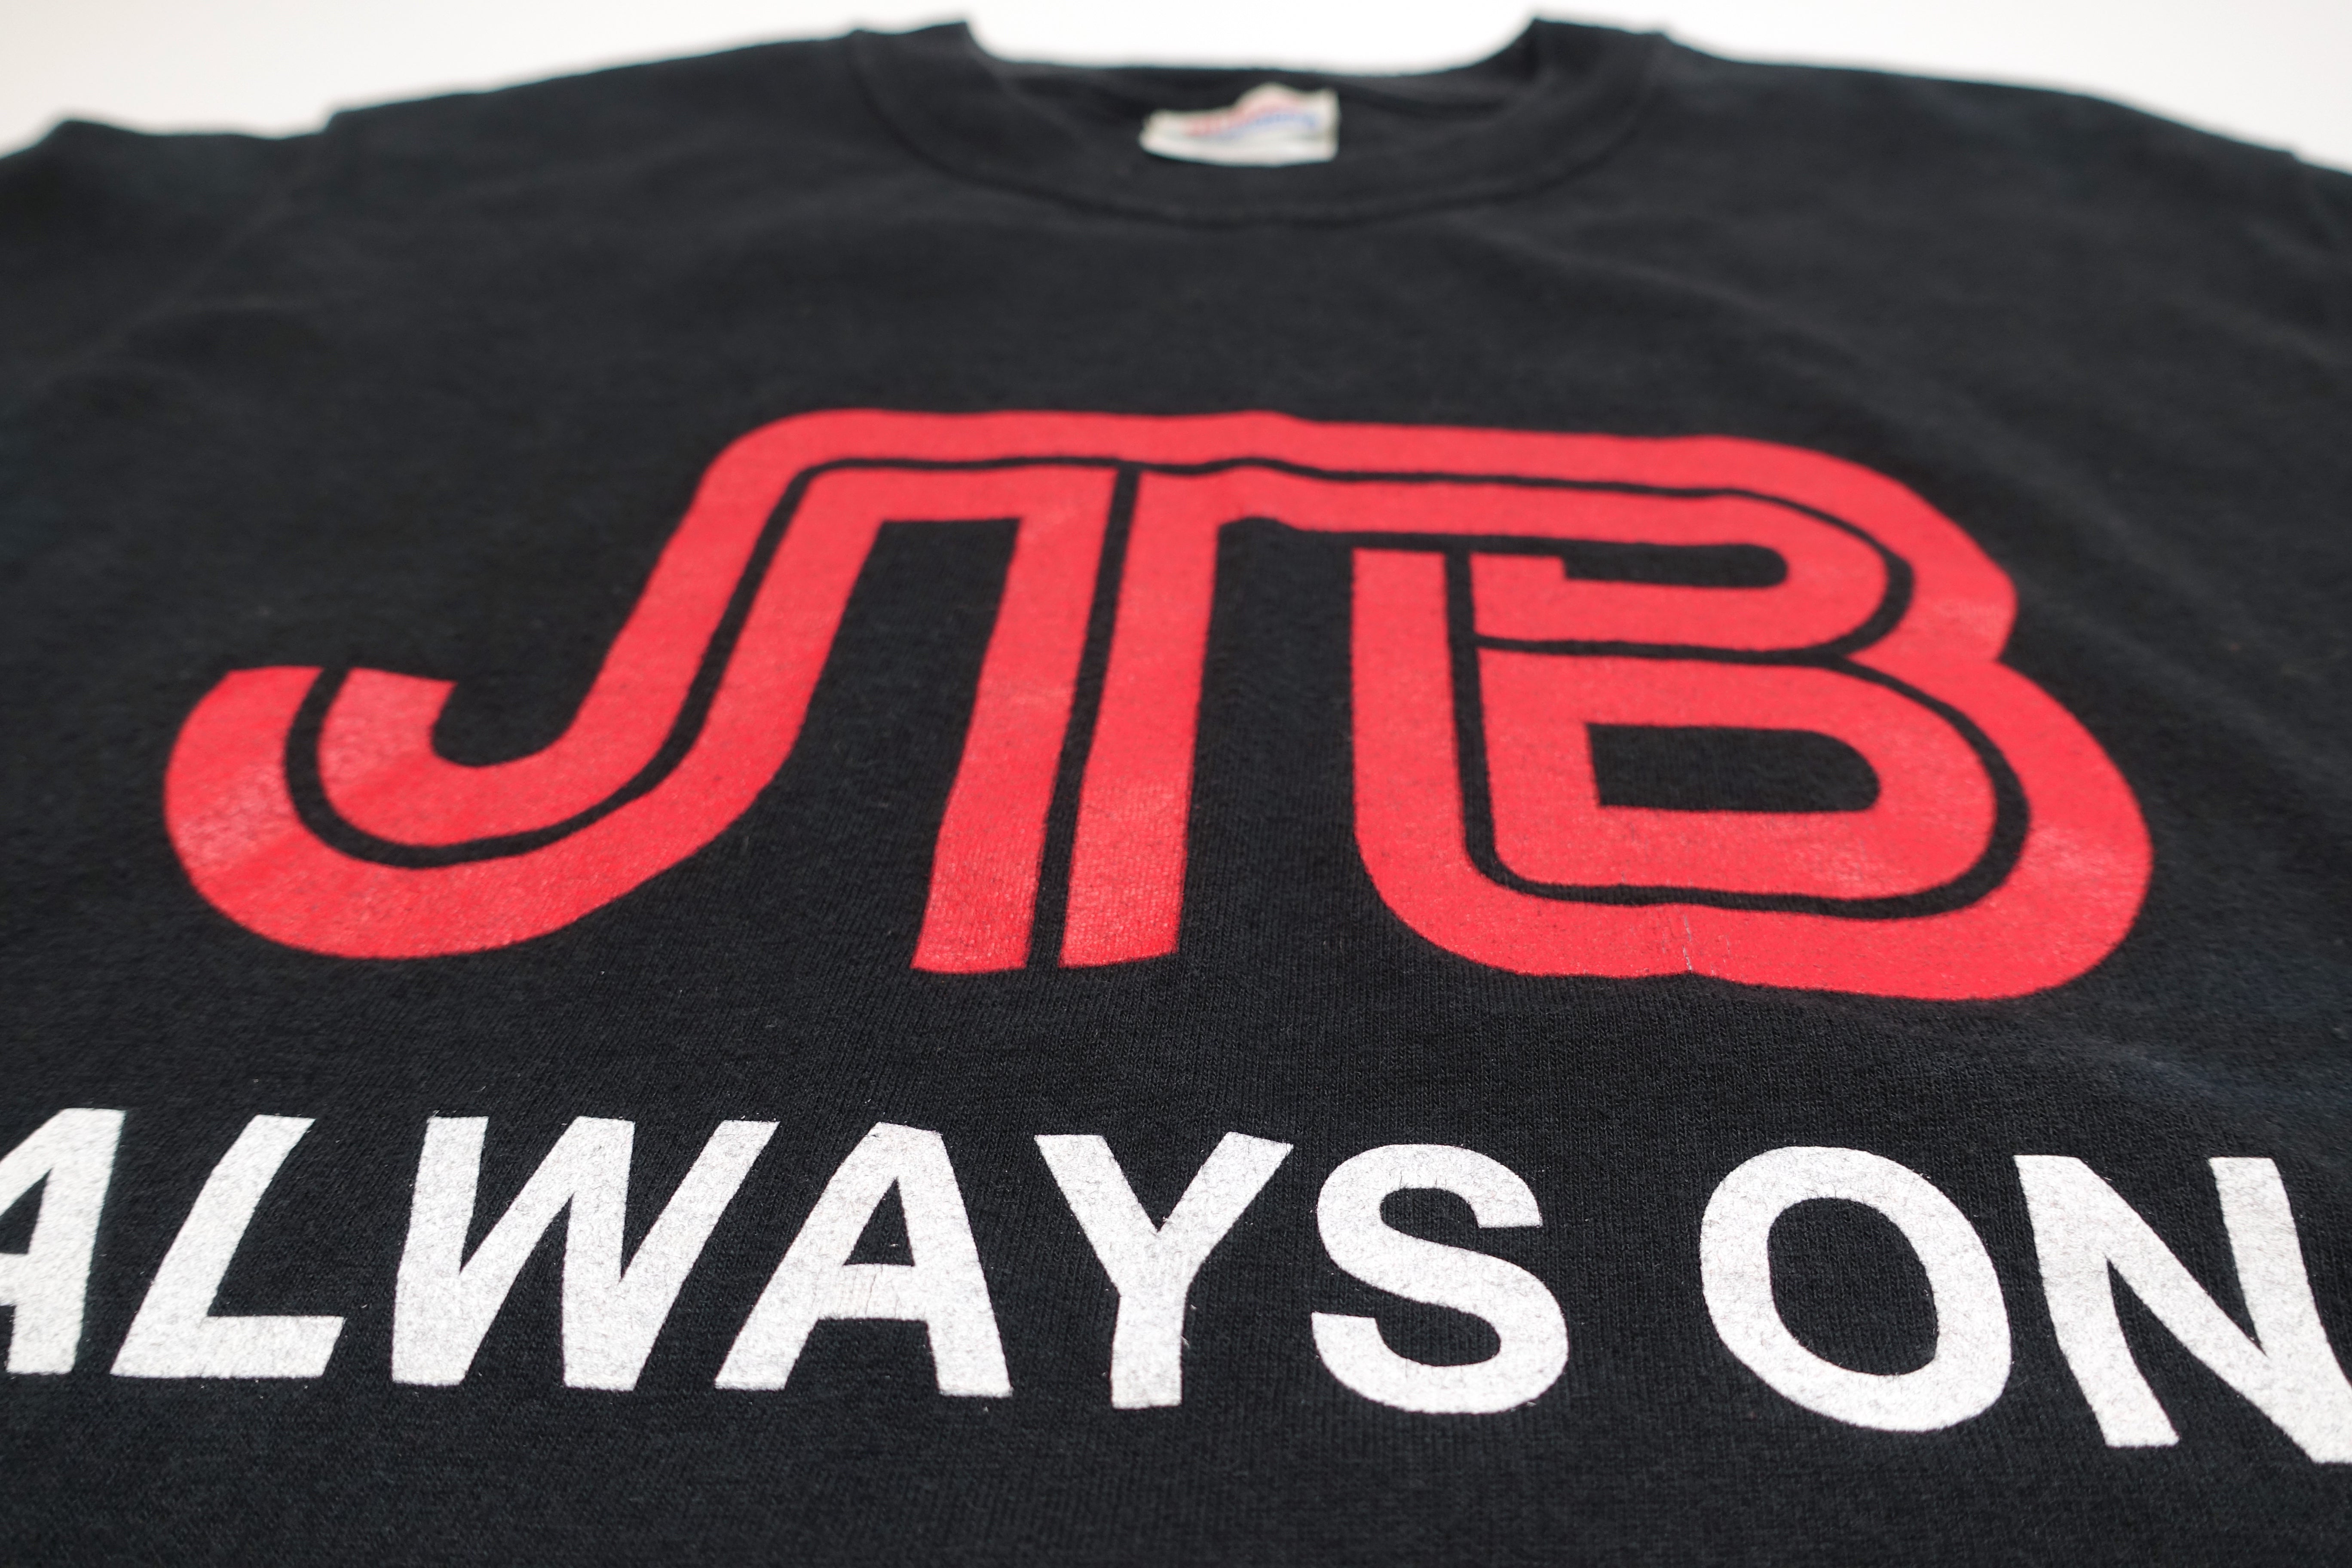 Jets To Brazil - JTB Always On 00's Tour Shirt Size Small